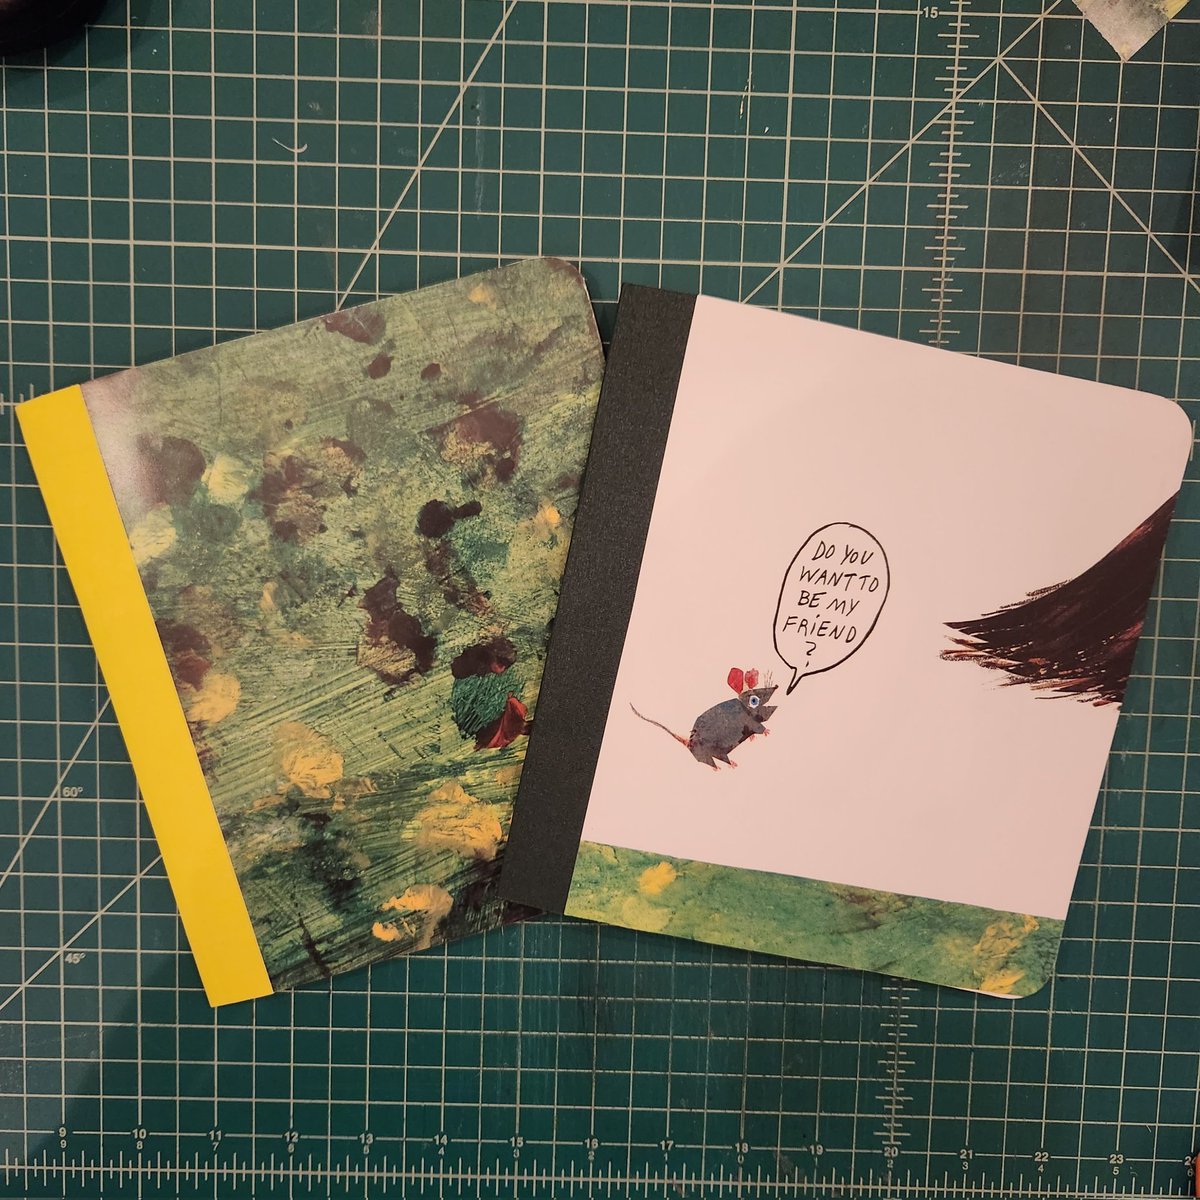 Some more #upcycled #catchpennybooks that will be at the #philadelphiacenterforthebook #bookpaperscissors event on Dec. 2nd! Recognize any of the picture book pages I used for covers? #ammaking #ambookbinding #bookarts #bookbinding